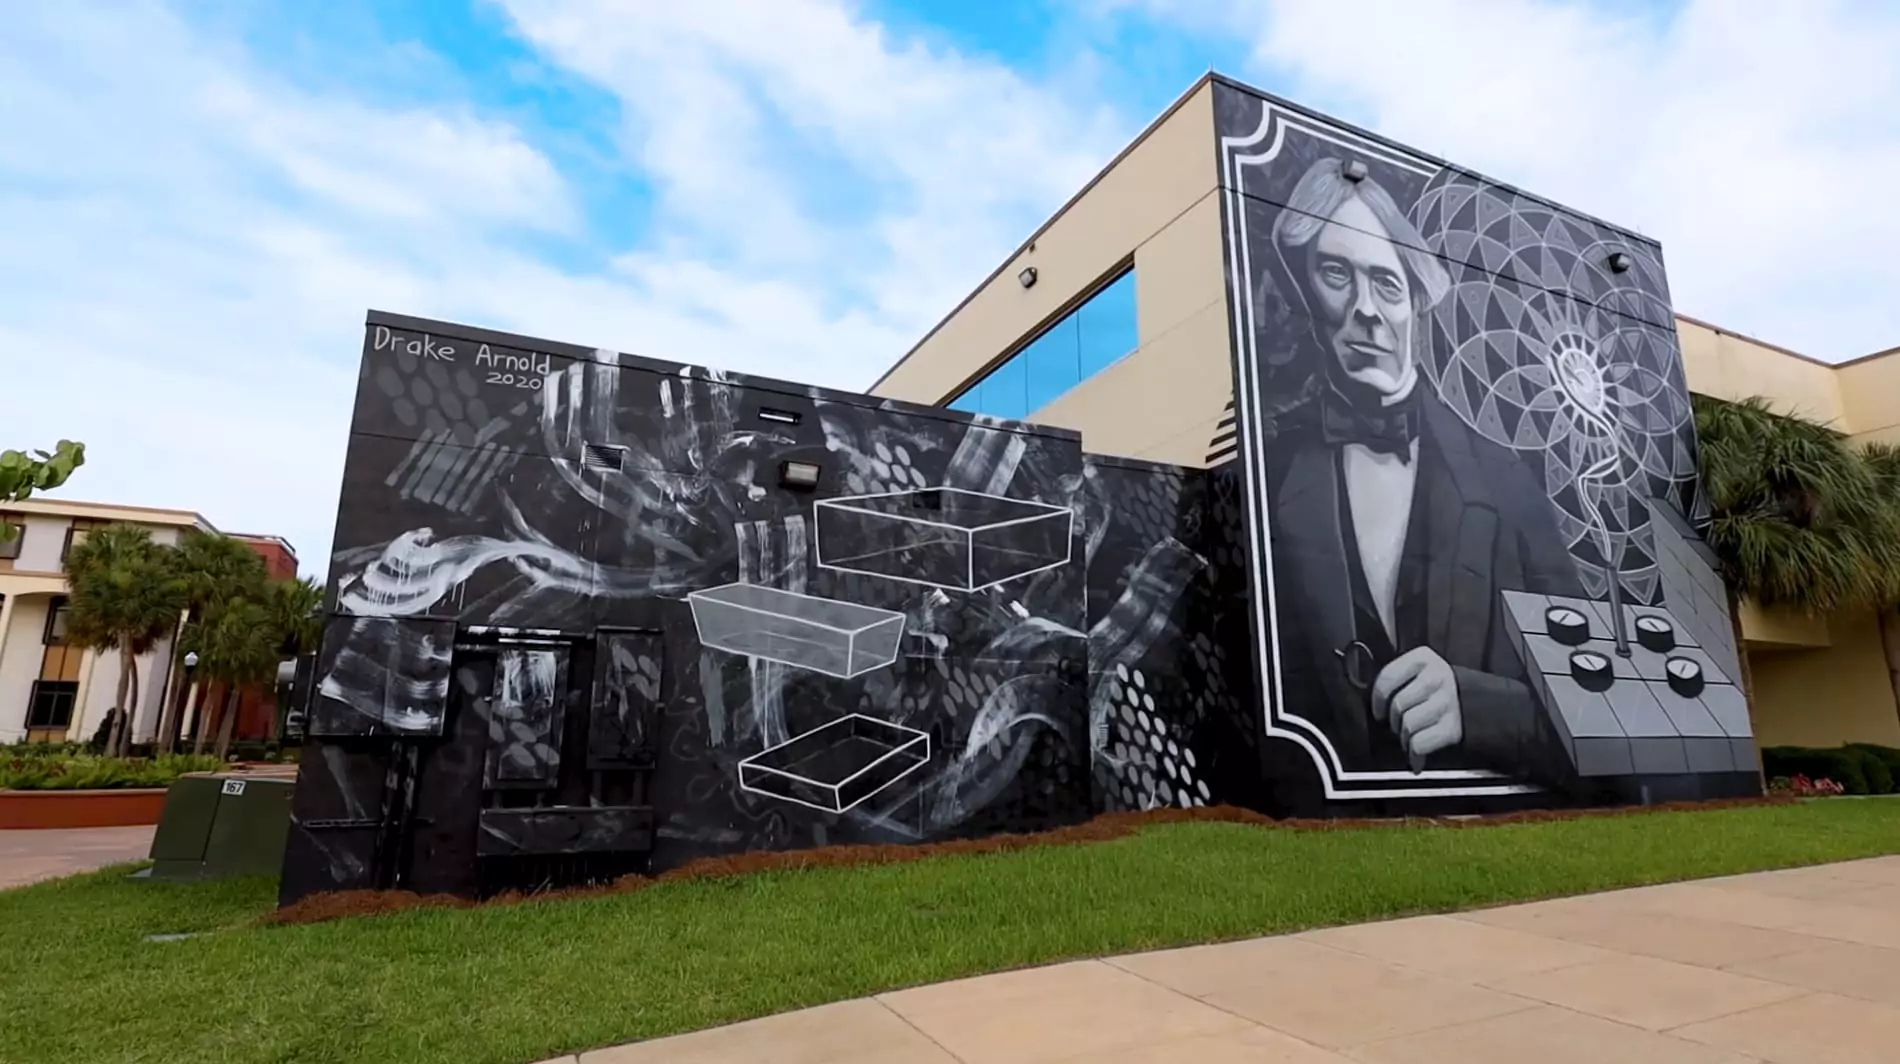 Still of the electromagnateism mural in Downtown Ocala, FL used for the "Drake Arnold for the City of Ocala" video.